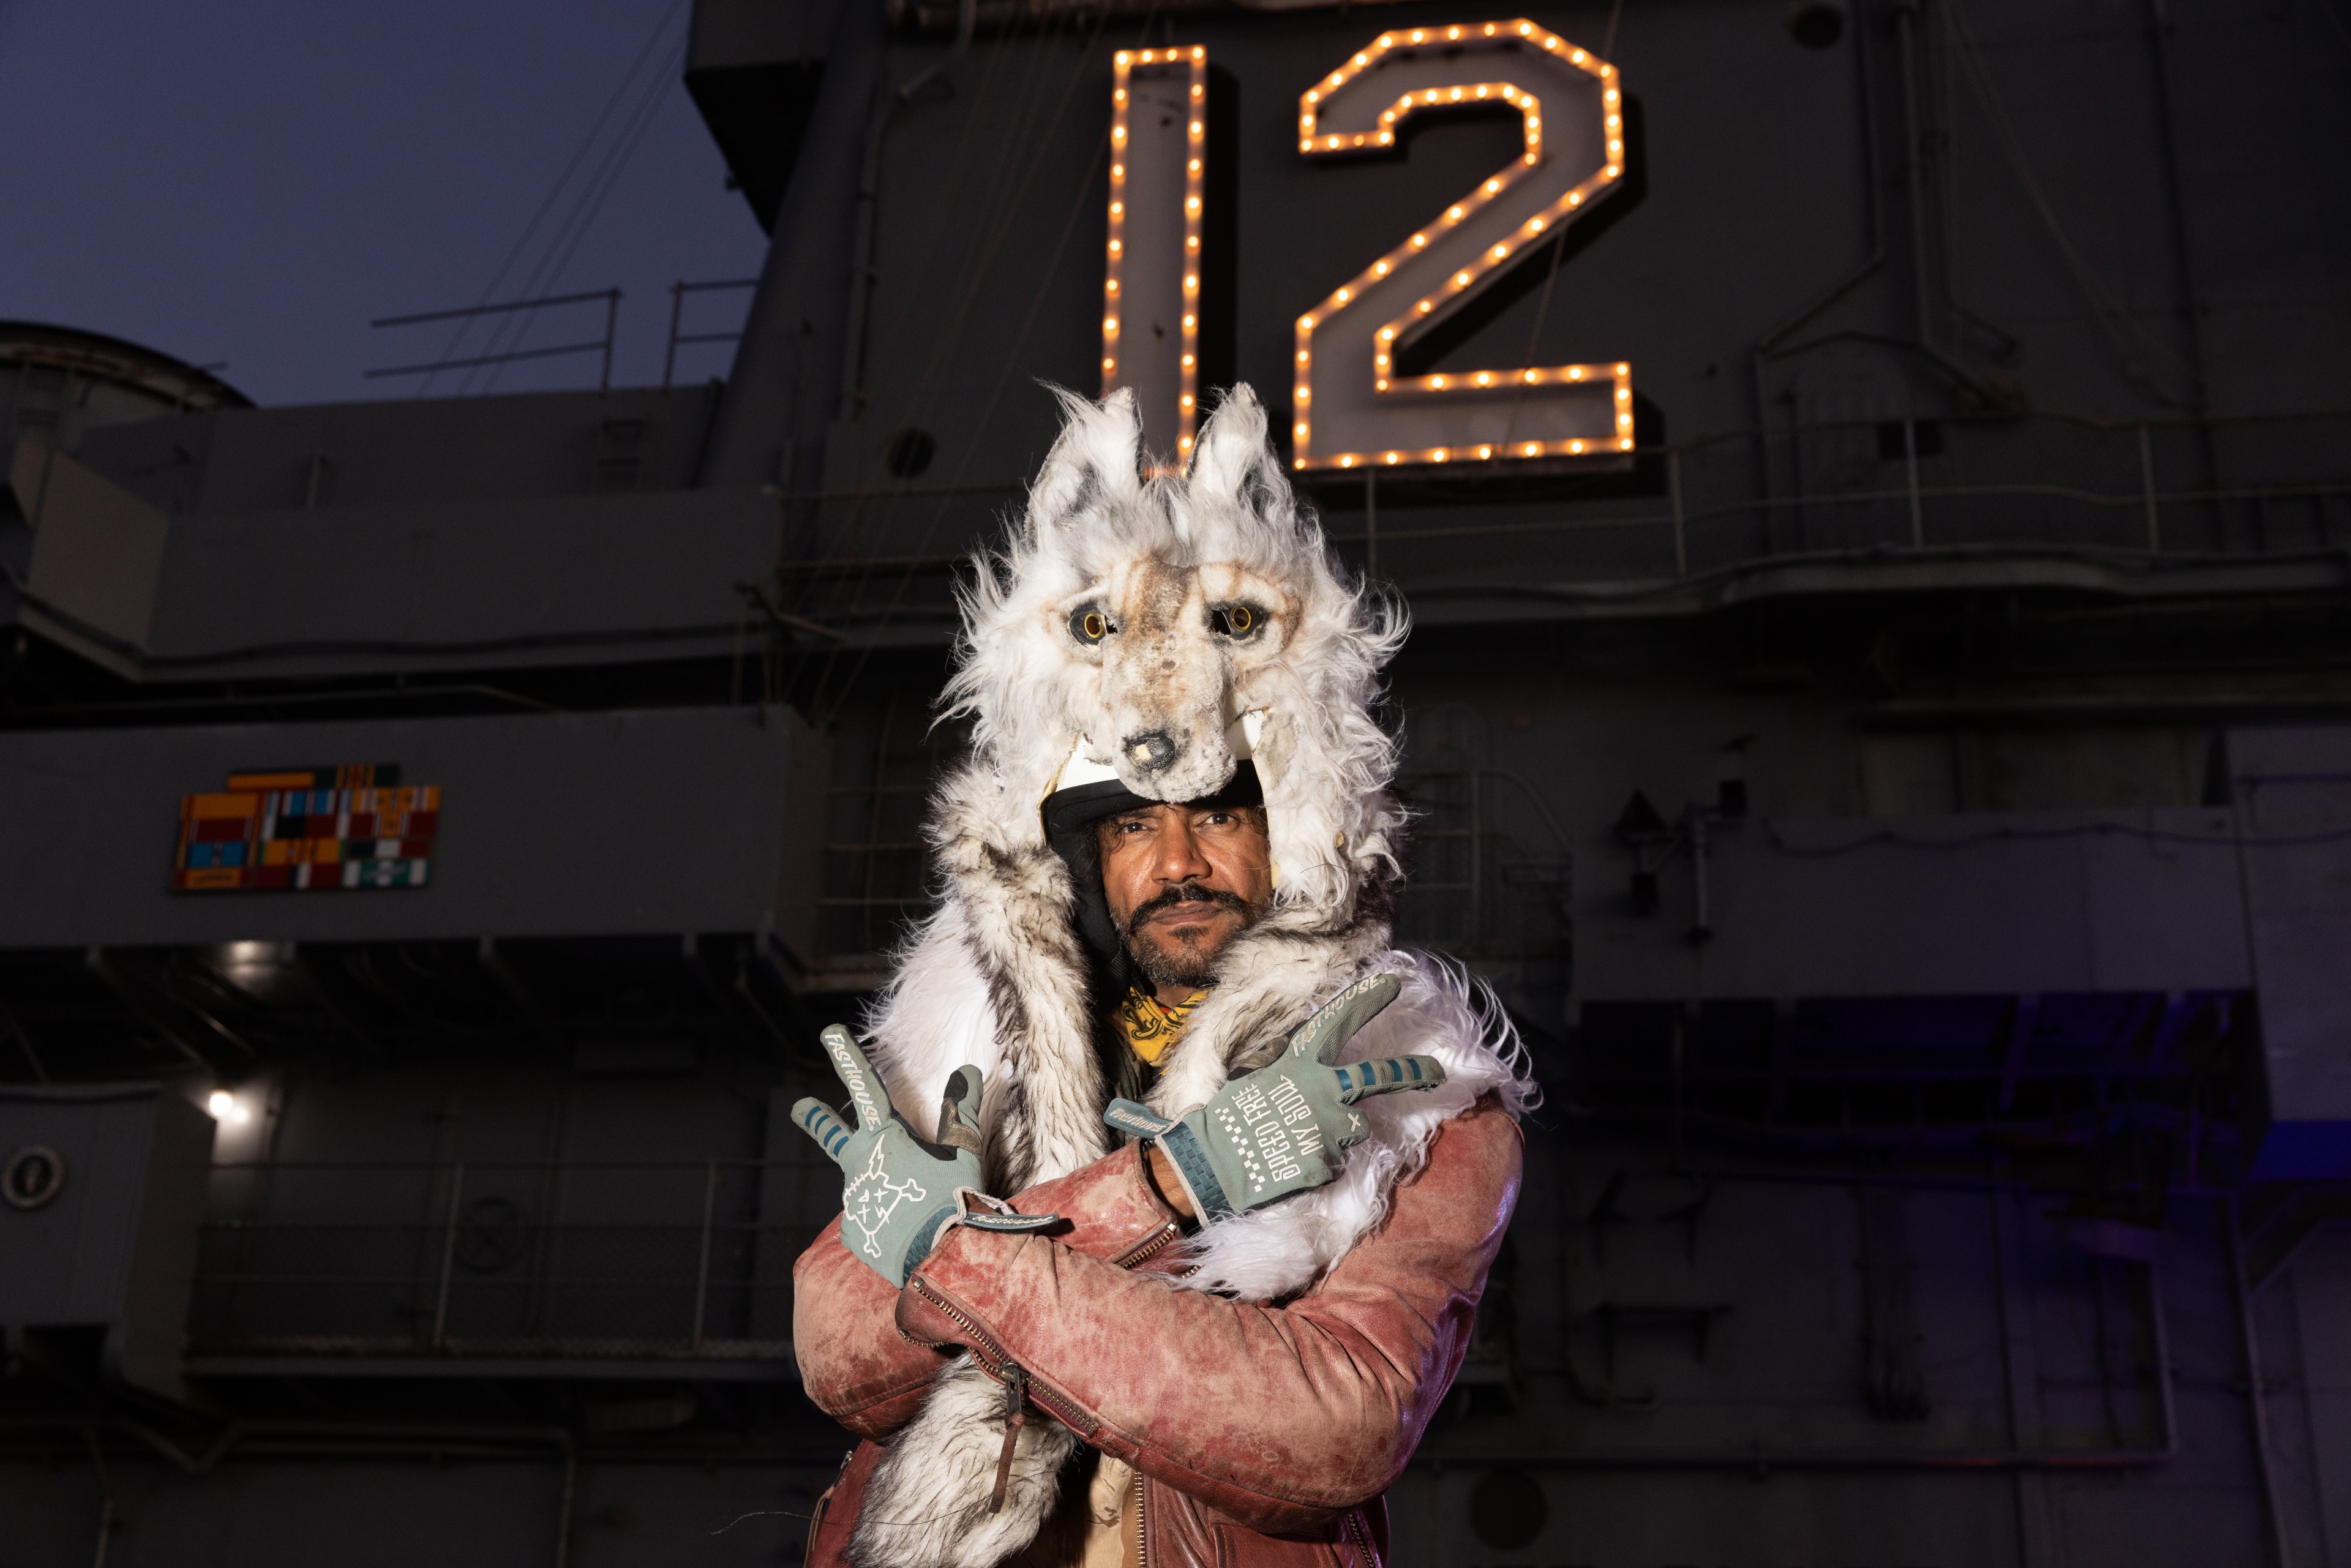 A person wearing a wolf-themed costume stands in front of a structure illuminated by a large number "12." They pose with crossed arms and gloved hands forming gestures.